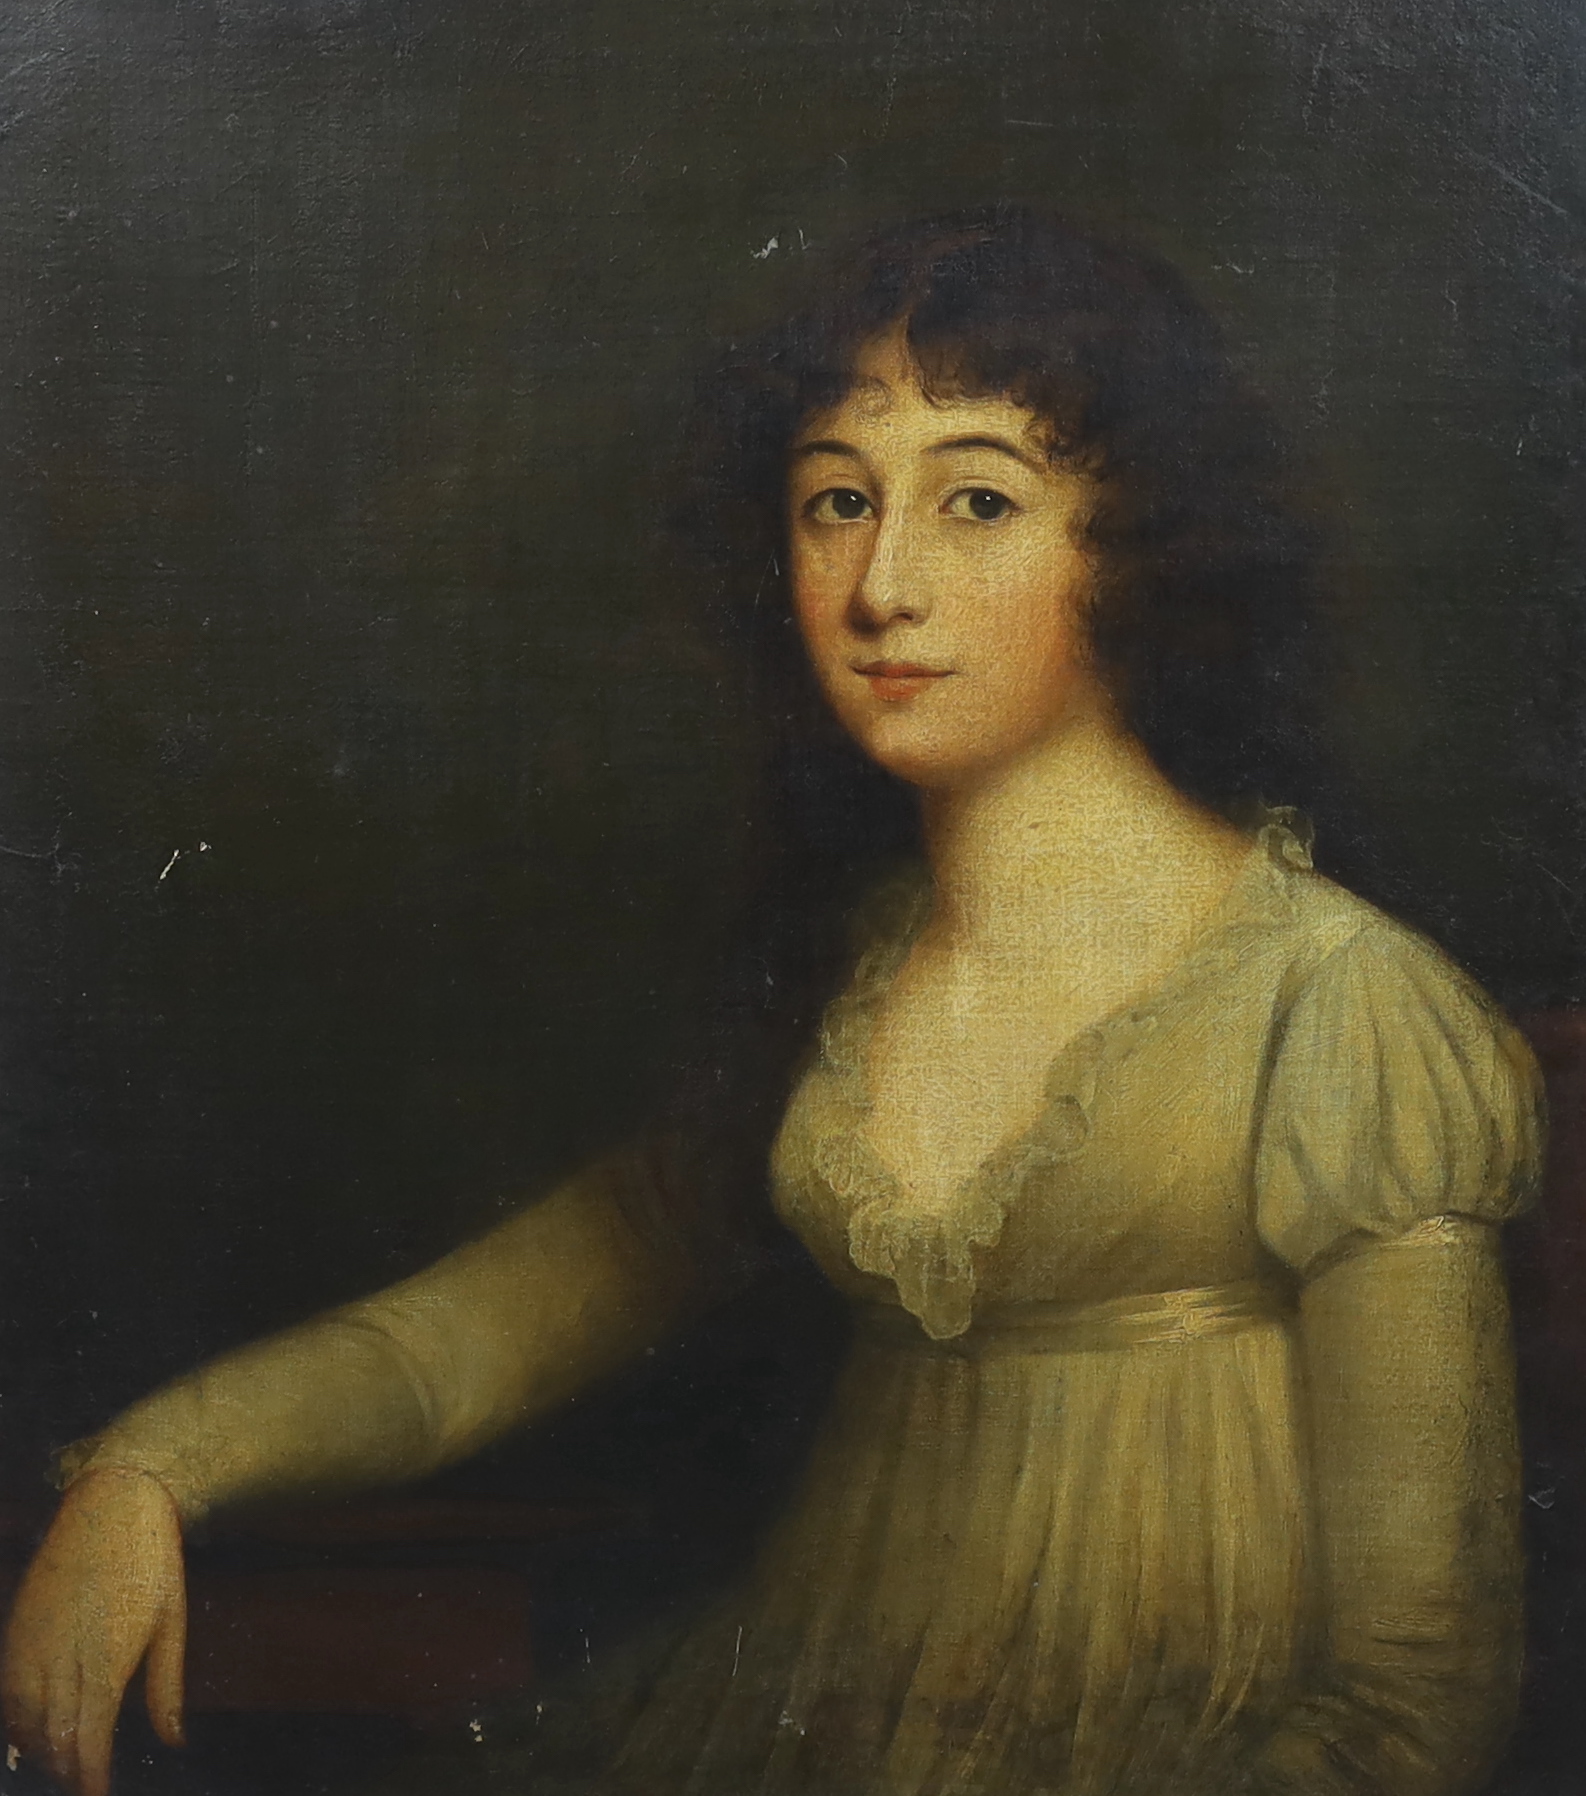 Late 18th century English School, Half length portrait of a young lady, seated with her arm resting upon a table, oil on canvas, 74 x 64cm